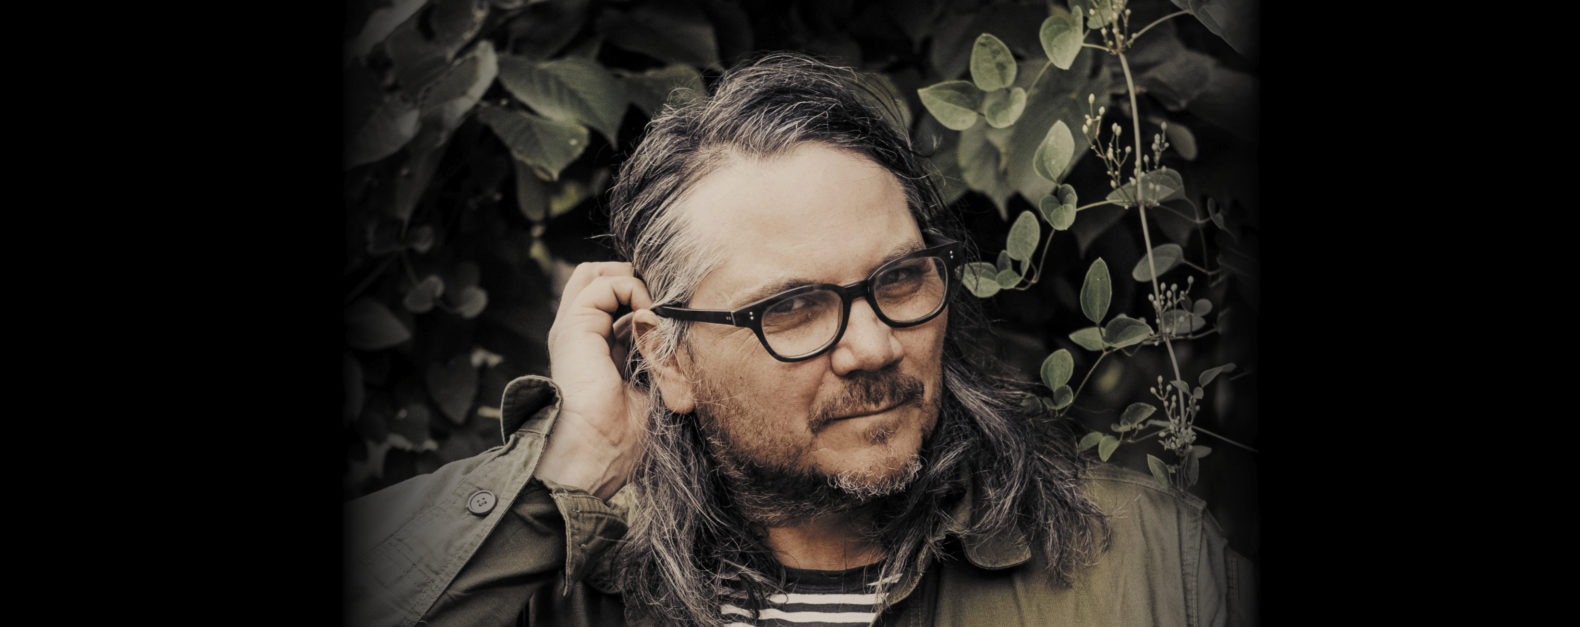 Jeff Tweedy benefit concert feature image, Jeff Tweedy in green shirt in front of green foliage tucking hair behind ear